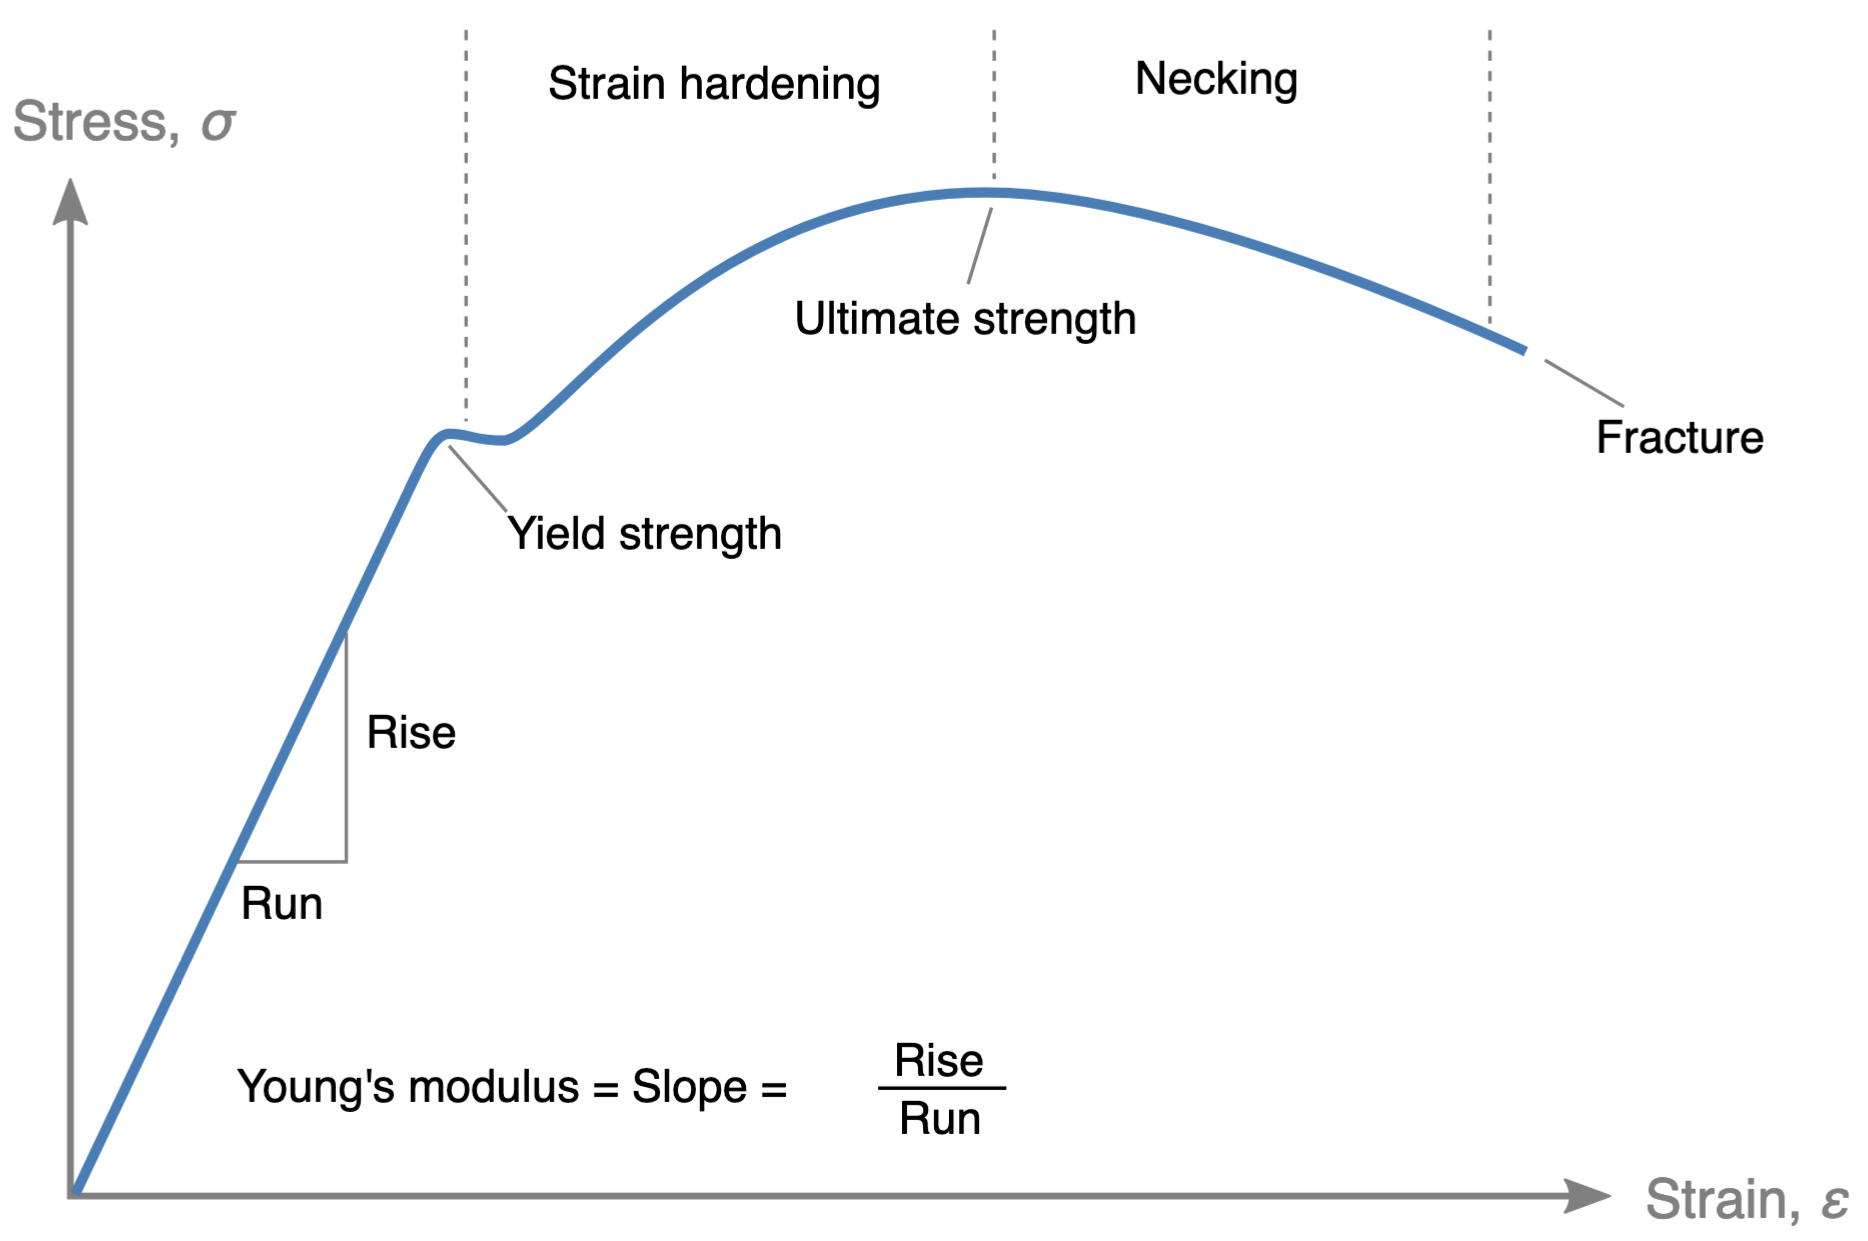 Typical stress vs. strain diagram for a ductile material (e.g. steel).  Shows the linear elastic region, strain hardening, and necking leading ultimately to fracture.  Source: Wikipedia user Nicoguaro